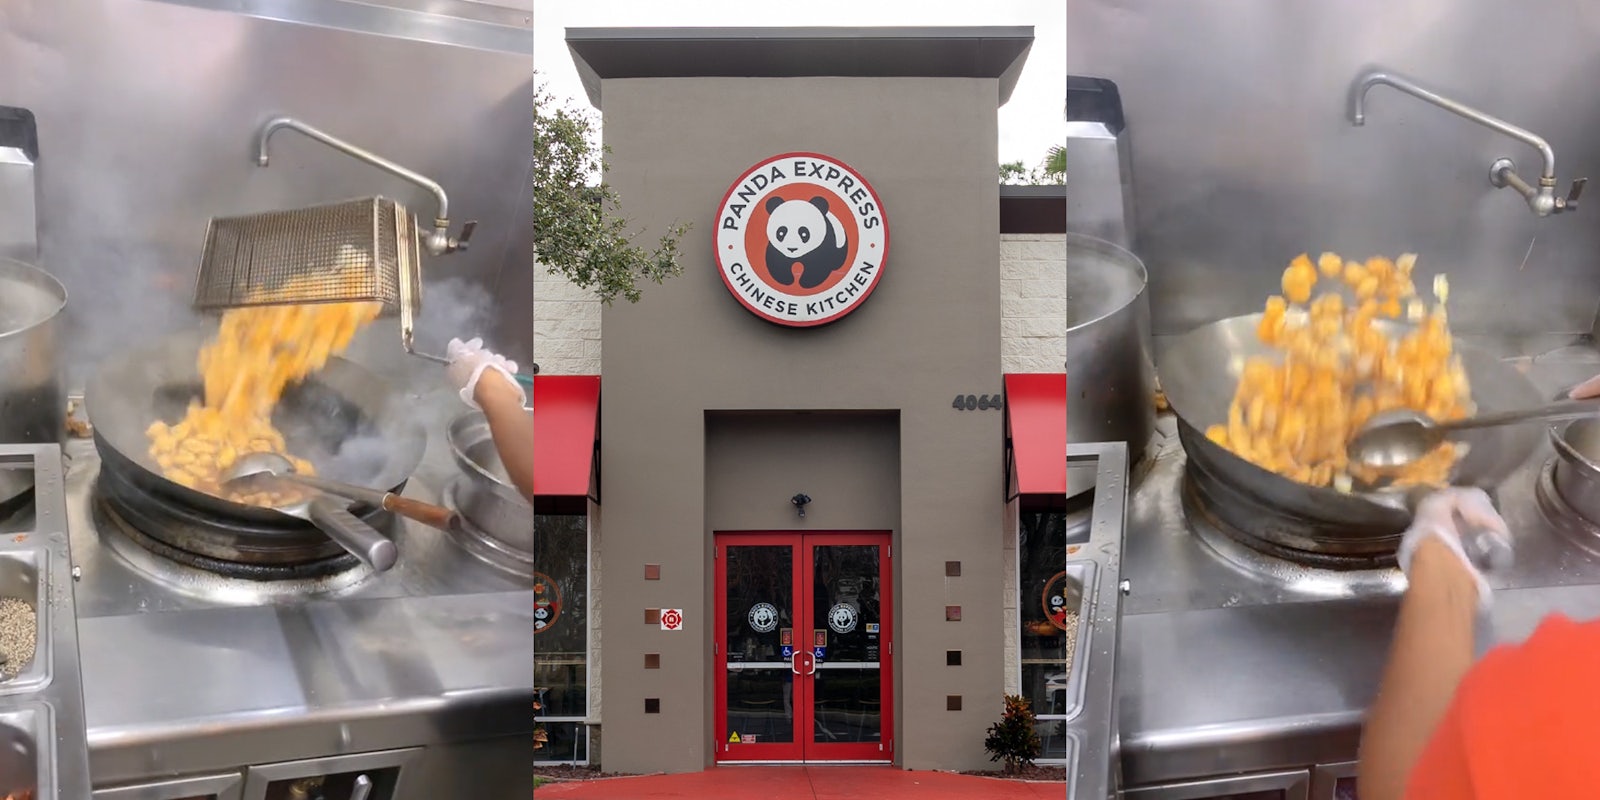 Panda Express worker dumping chicken and peppers into hot wok (l) Panda Express building with sign (c) Panda Express worker using wok to cook sweet fire chicken (r)